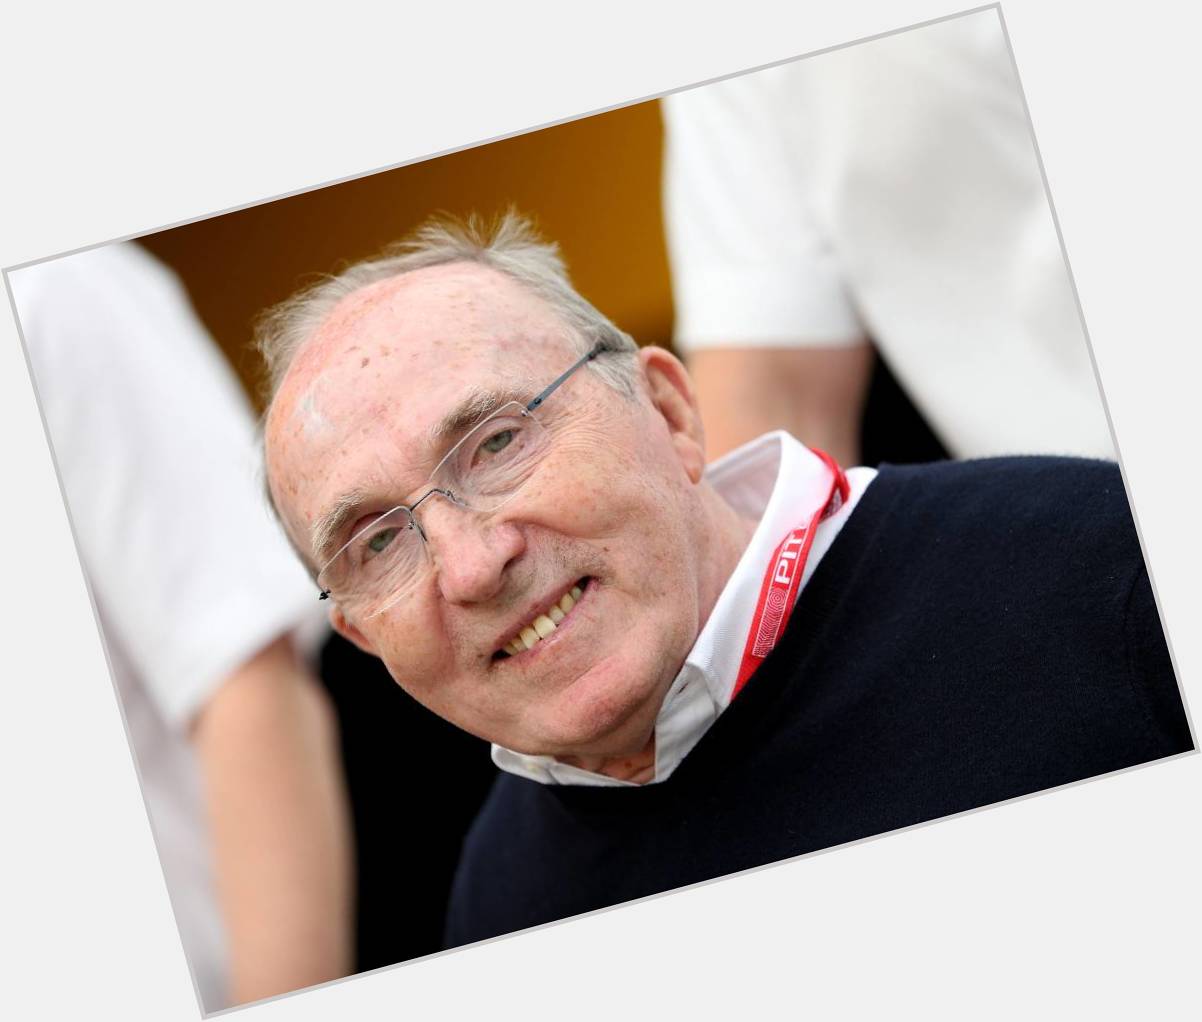  Happy Birthday to Sir Frank Williams!

One of F1\s living legends turns 79 today! 